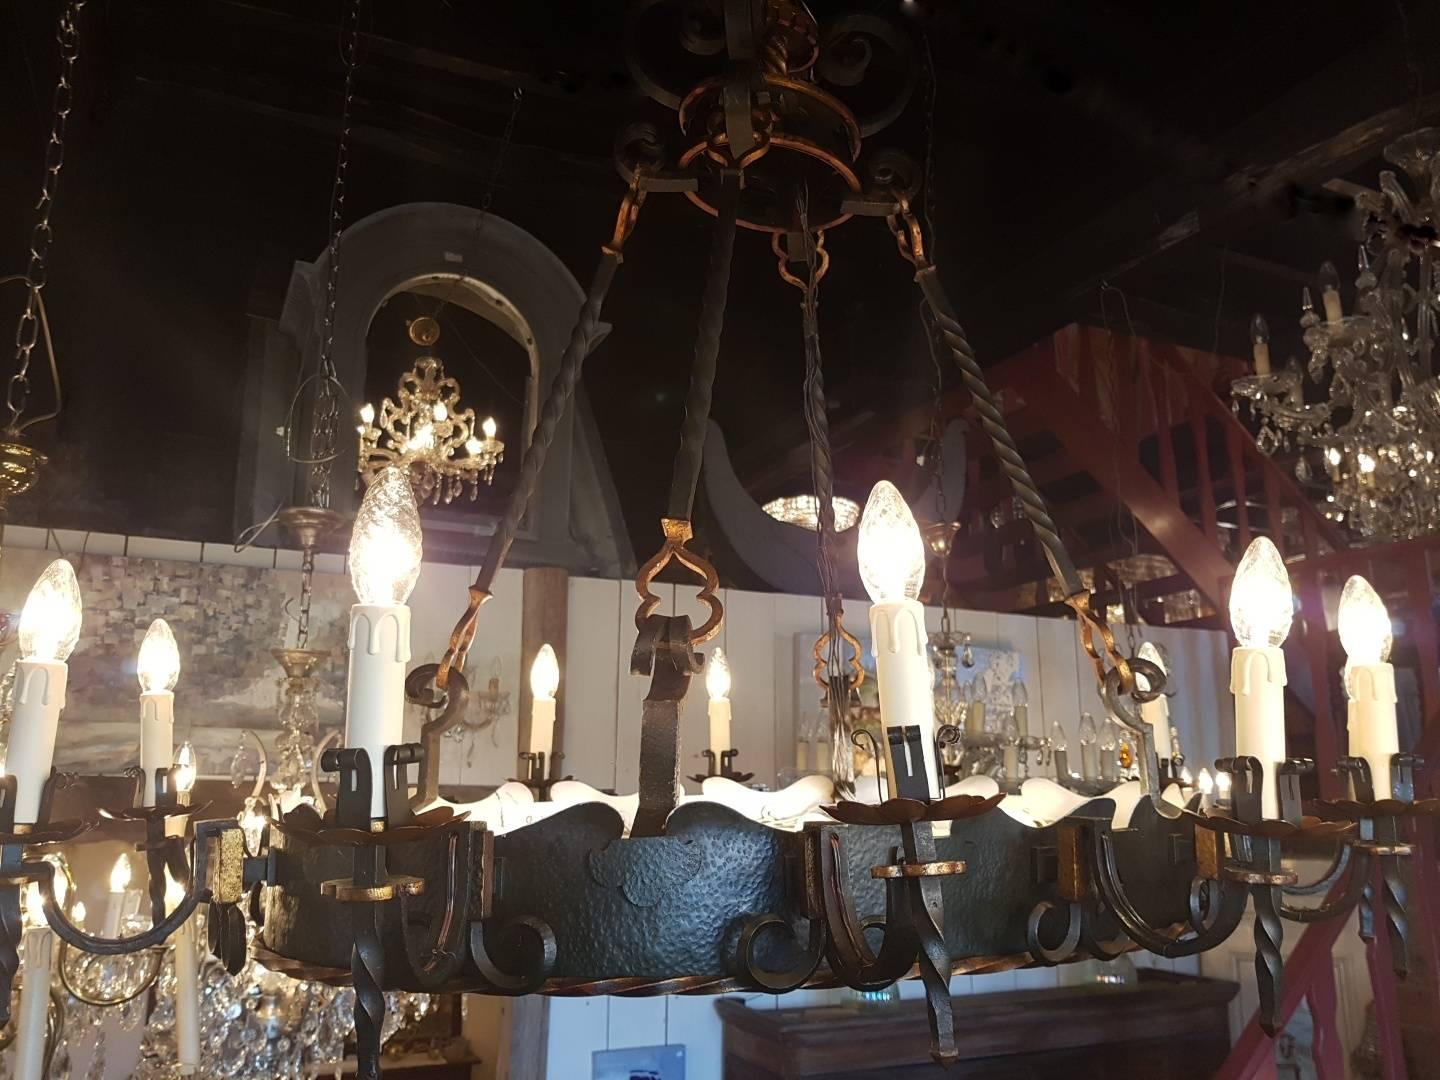 Original oval wrought iron castle chandelier with eight lights at the bottom installed above an oval glass plate. 12 candle lights connected to the ring painted in the colors black and doré /gold. Nicely decorated by the blacksmith with ornaments